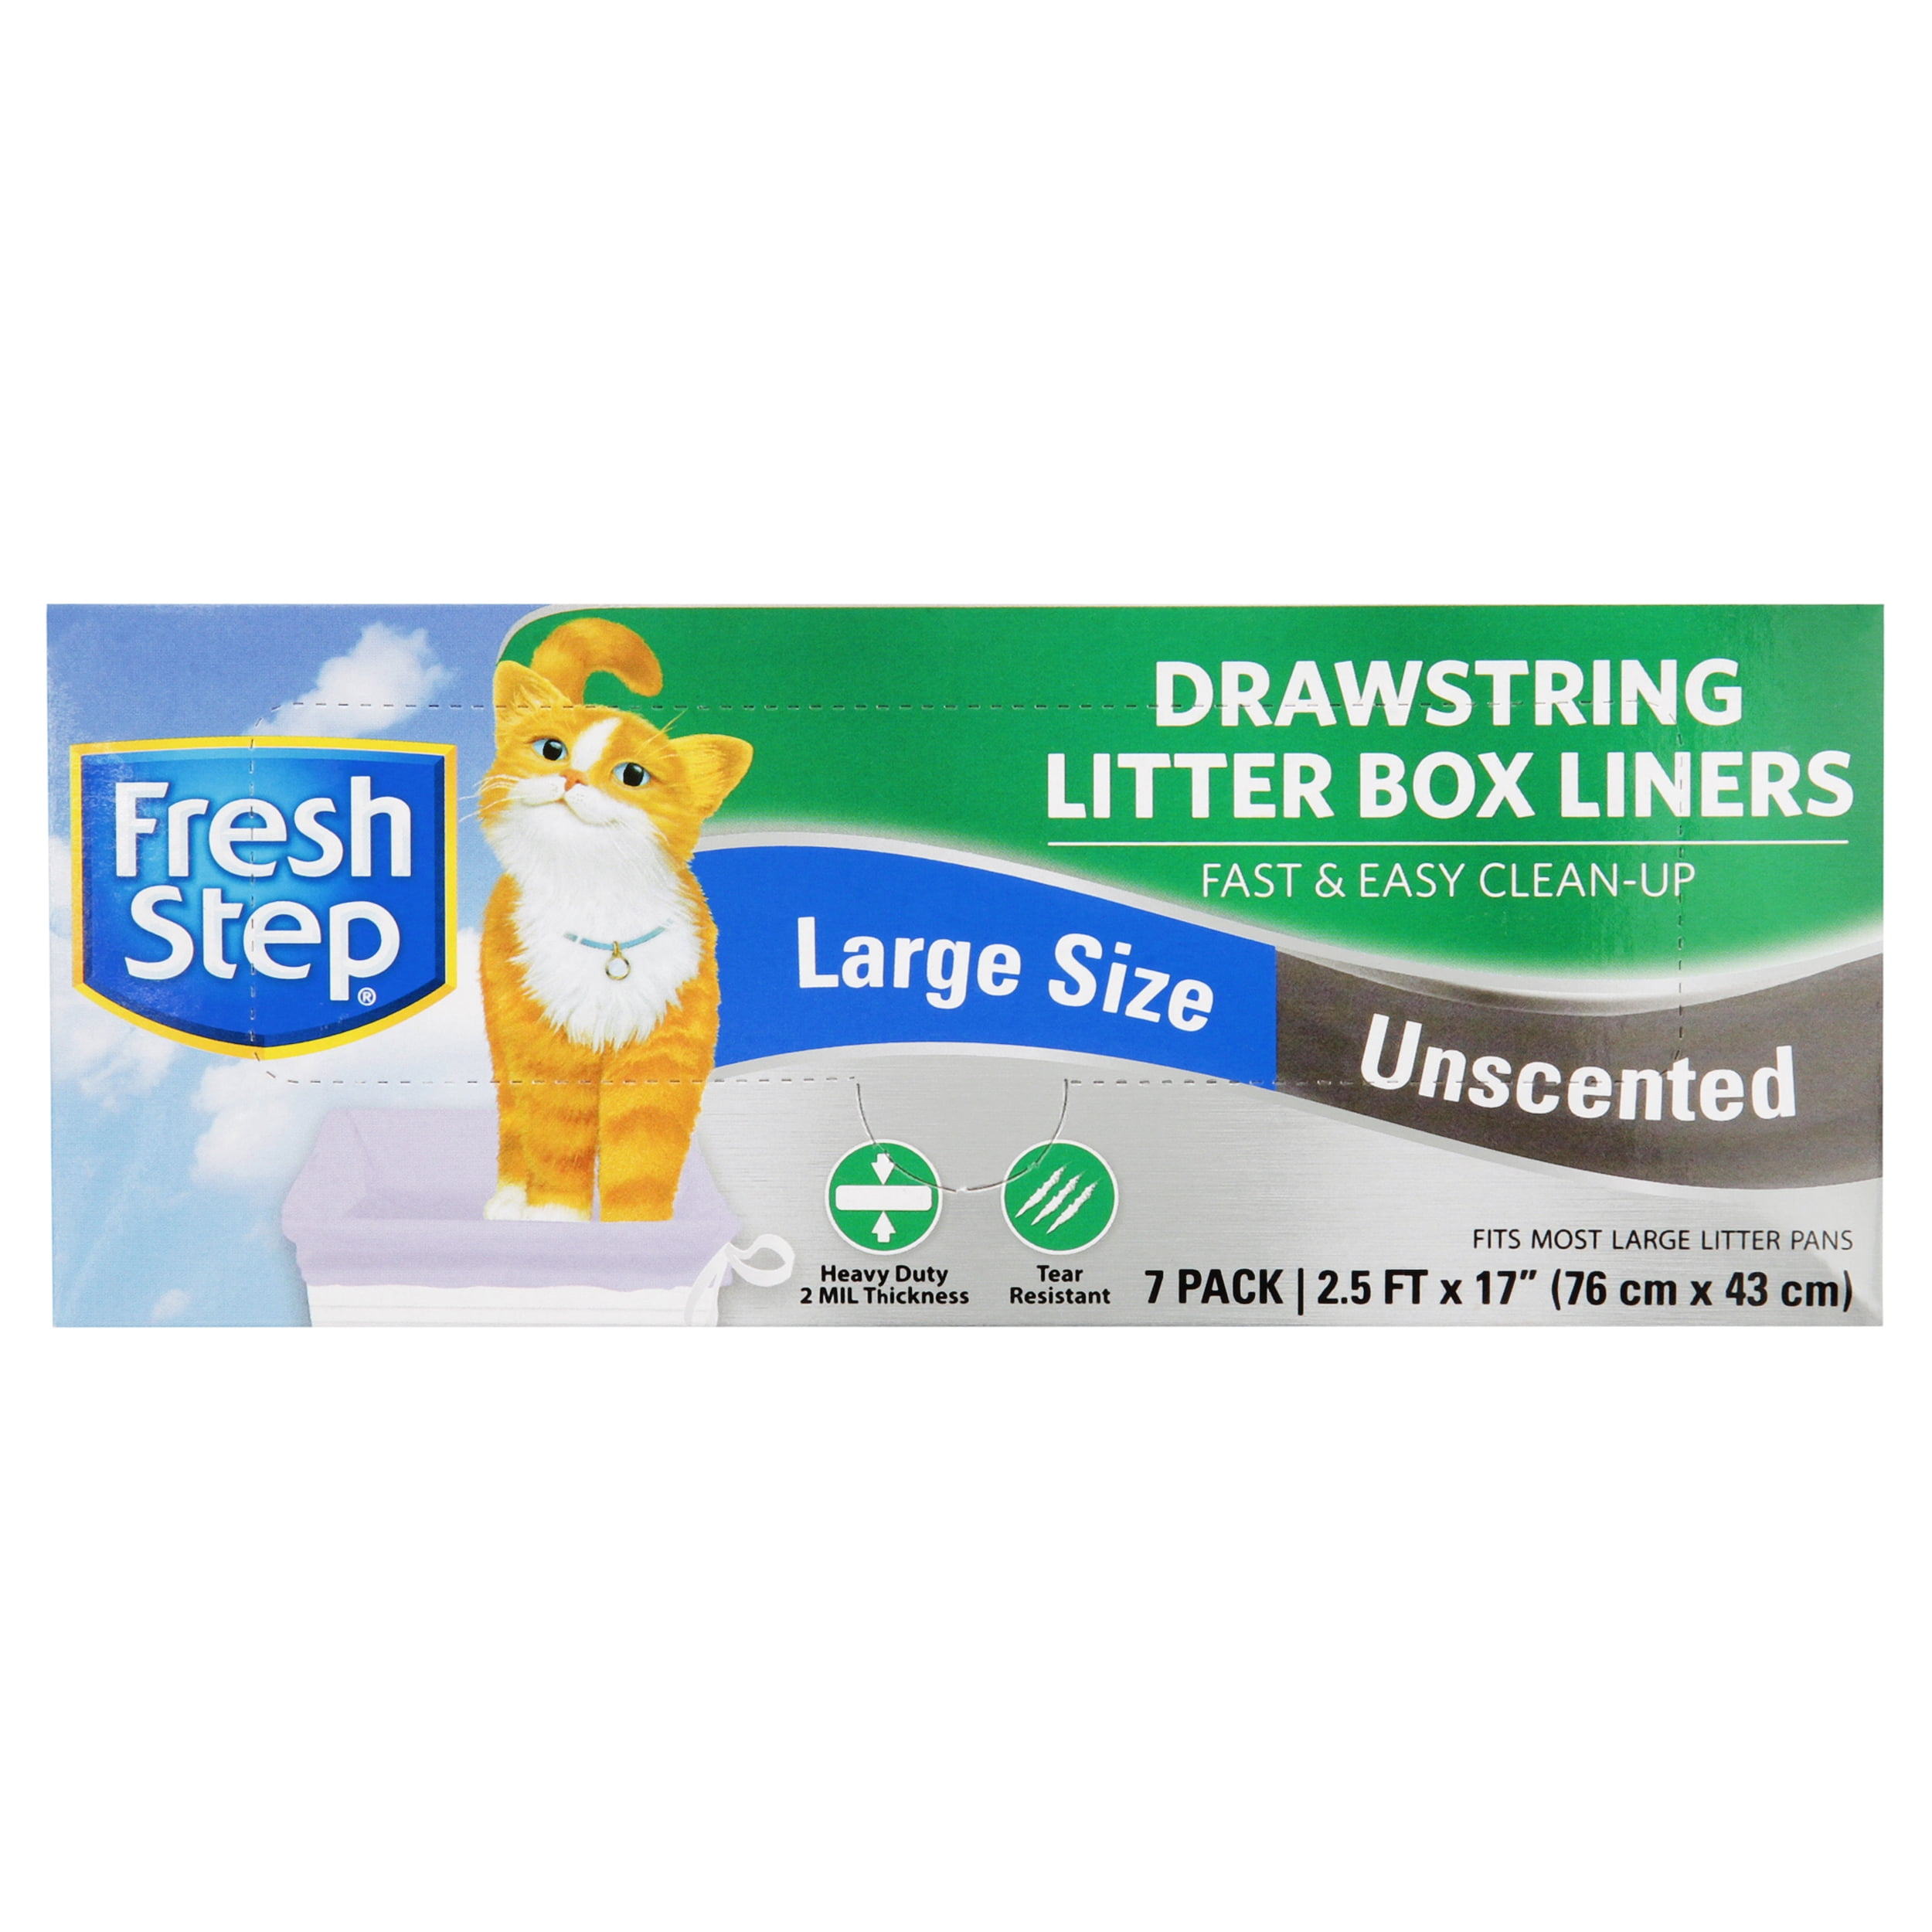 Scented & Unscented Available Fresh Step Drawstring Large Litter Box Liners Heavy Duty Liners for Cat Litter Box Quick & Easy Cleanup 